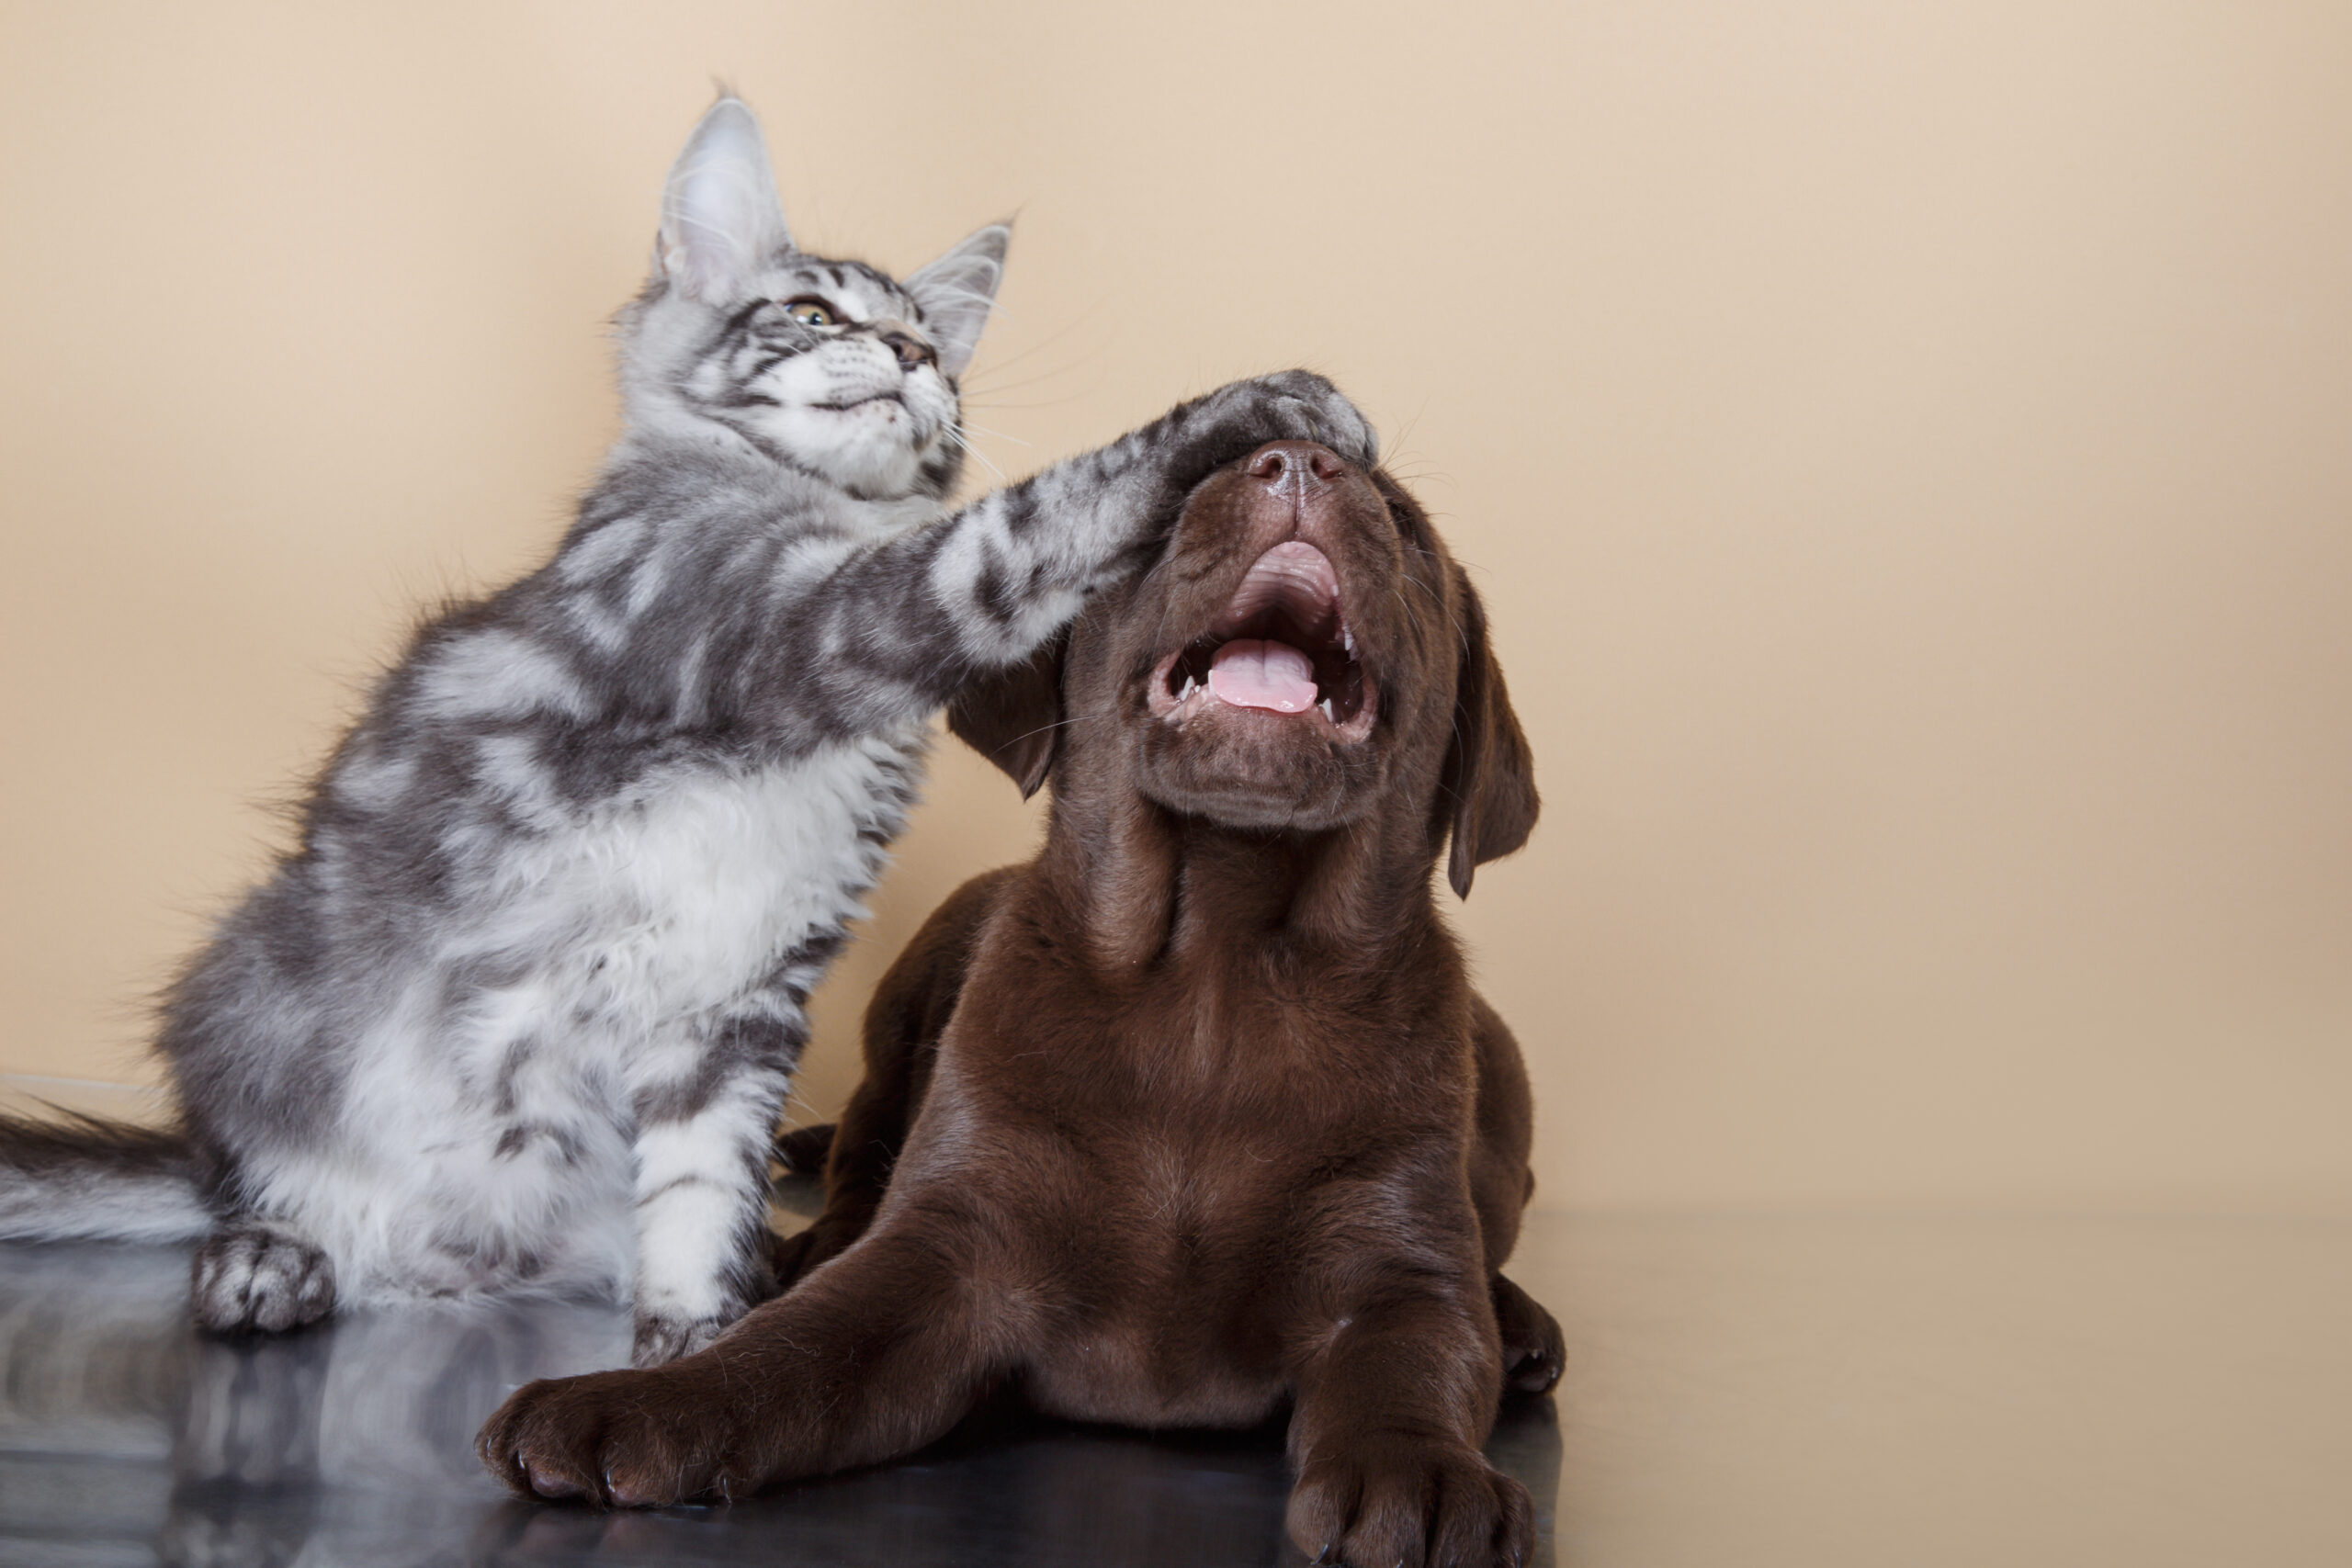 In this blog we explore some cat and dog breeds that have a higher likelihood of getting along well in a shared home!